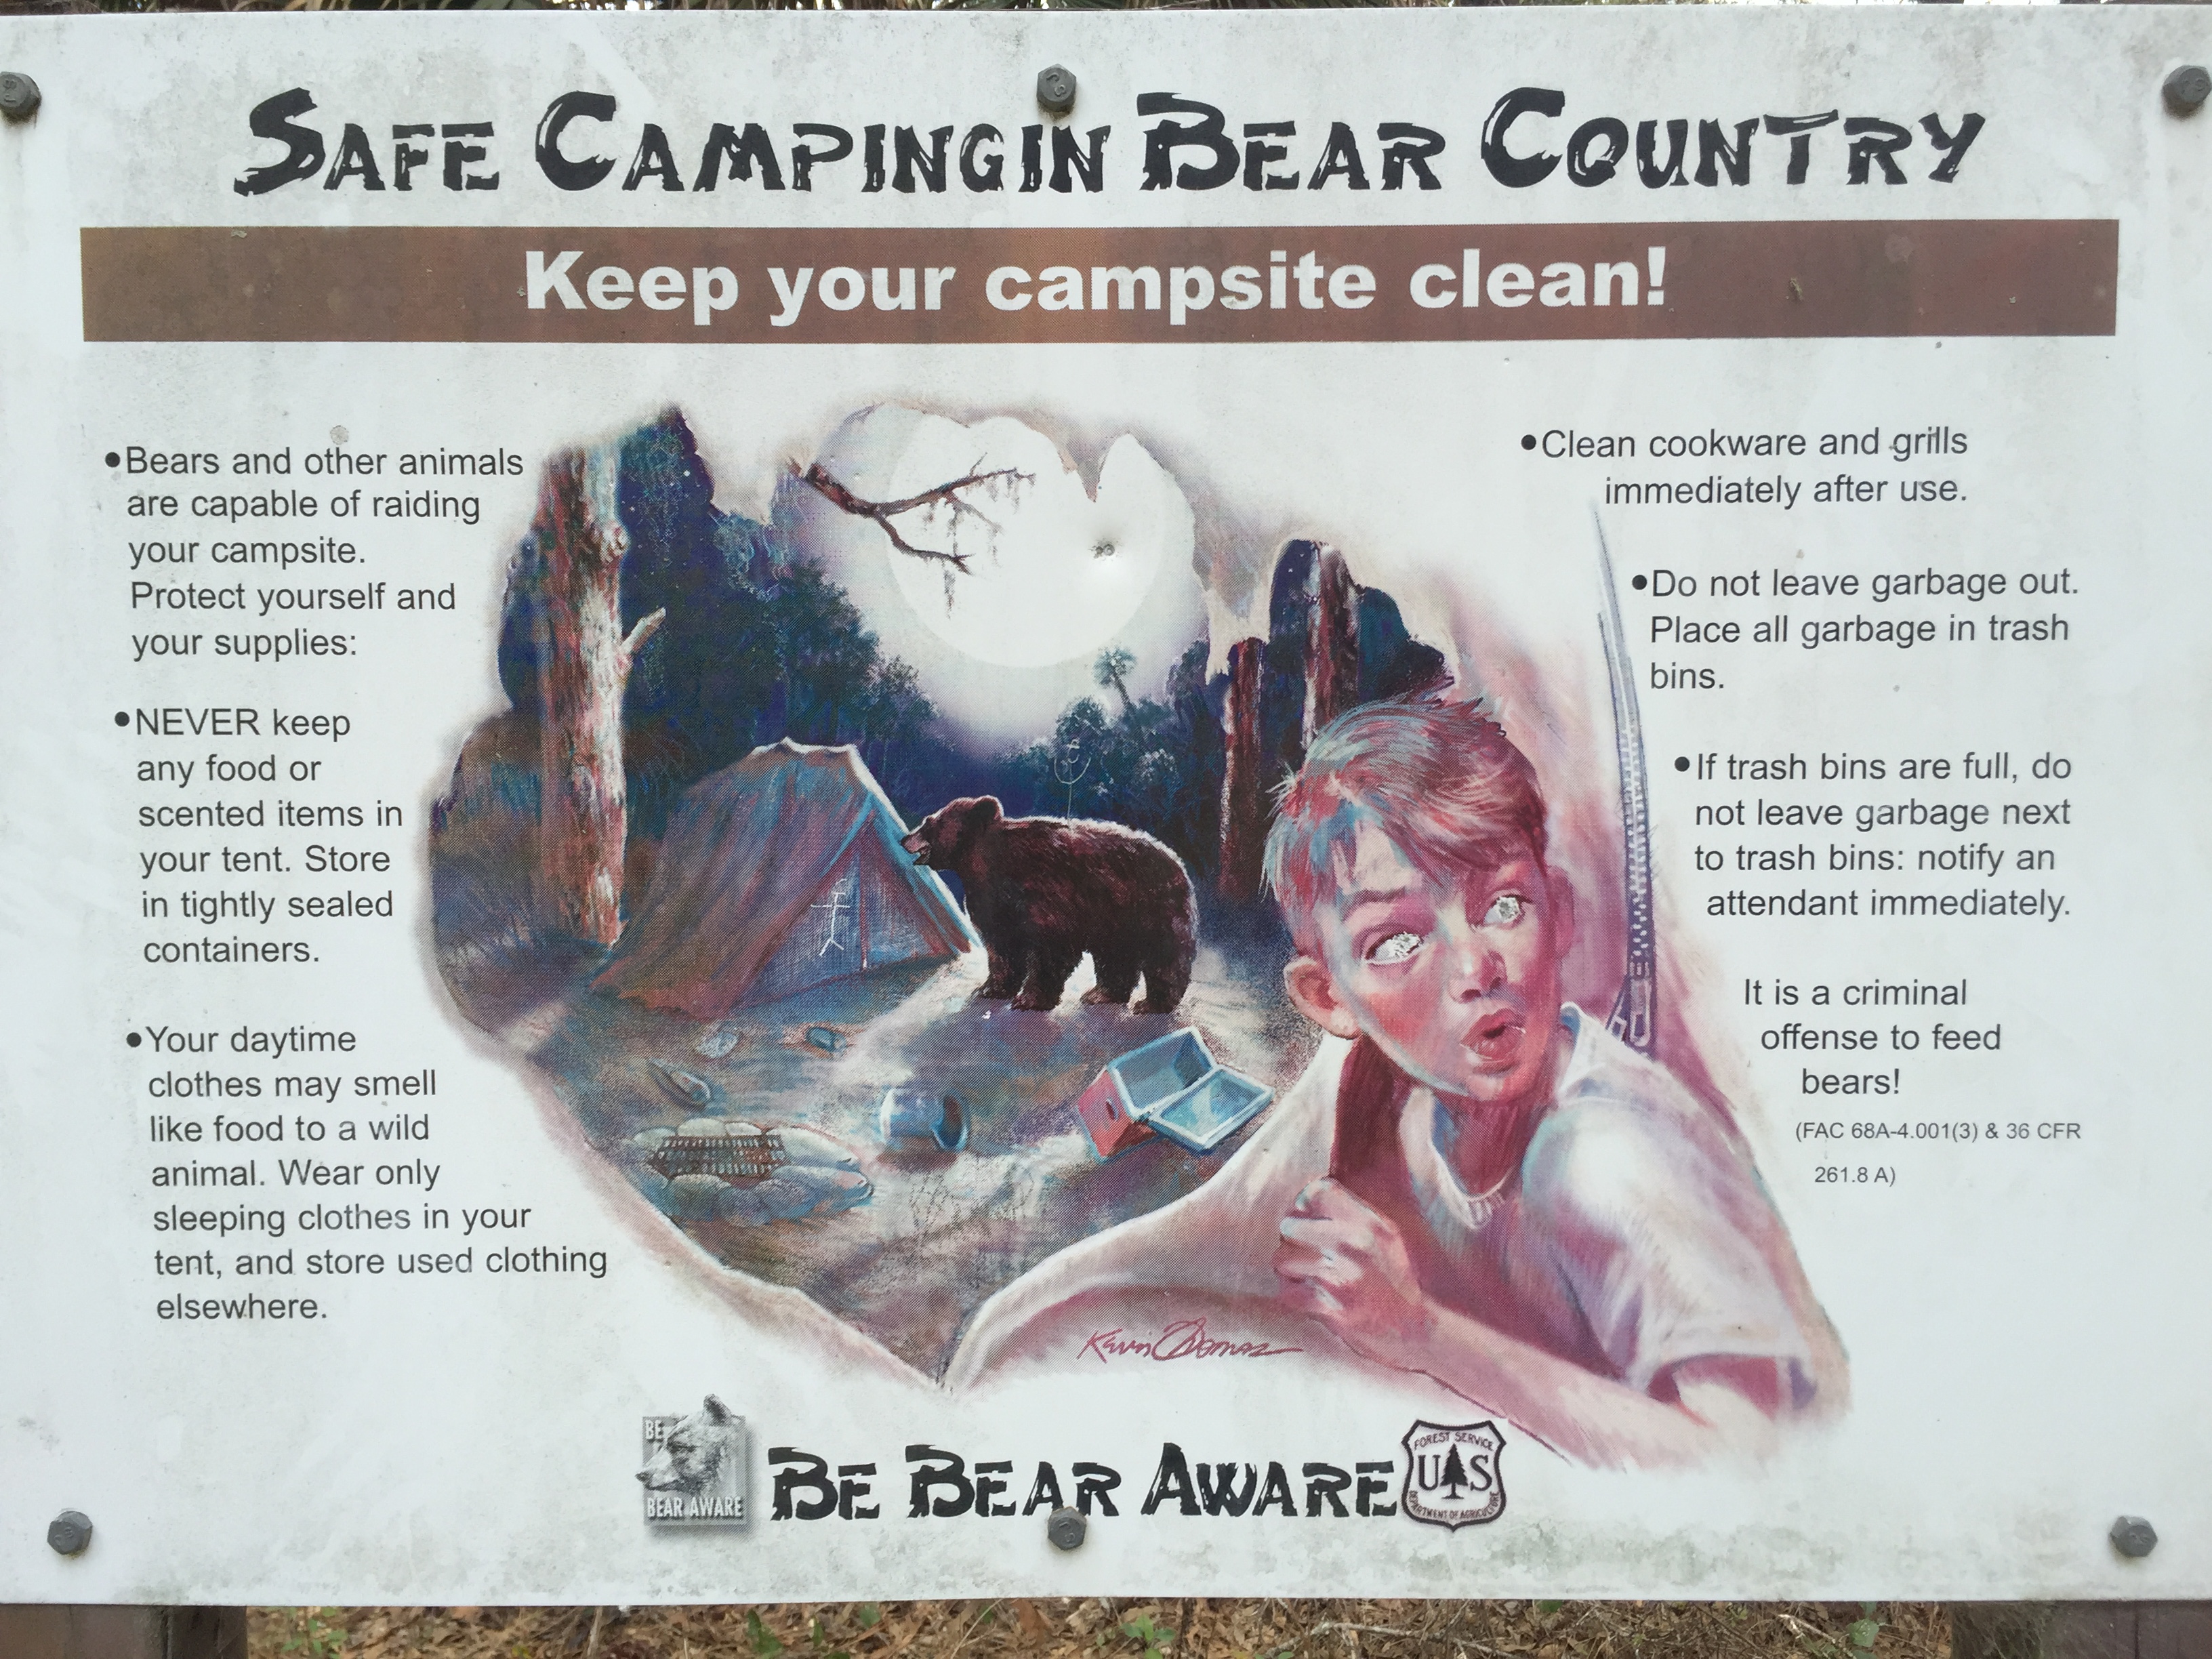 Bear aware in the Ocala National Forest.